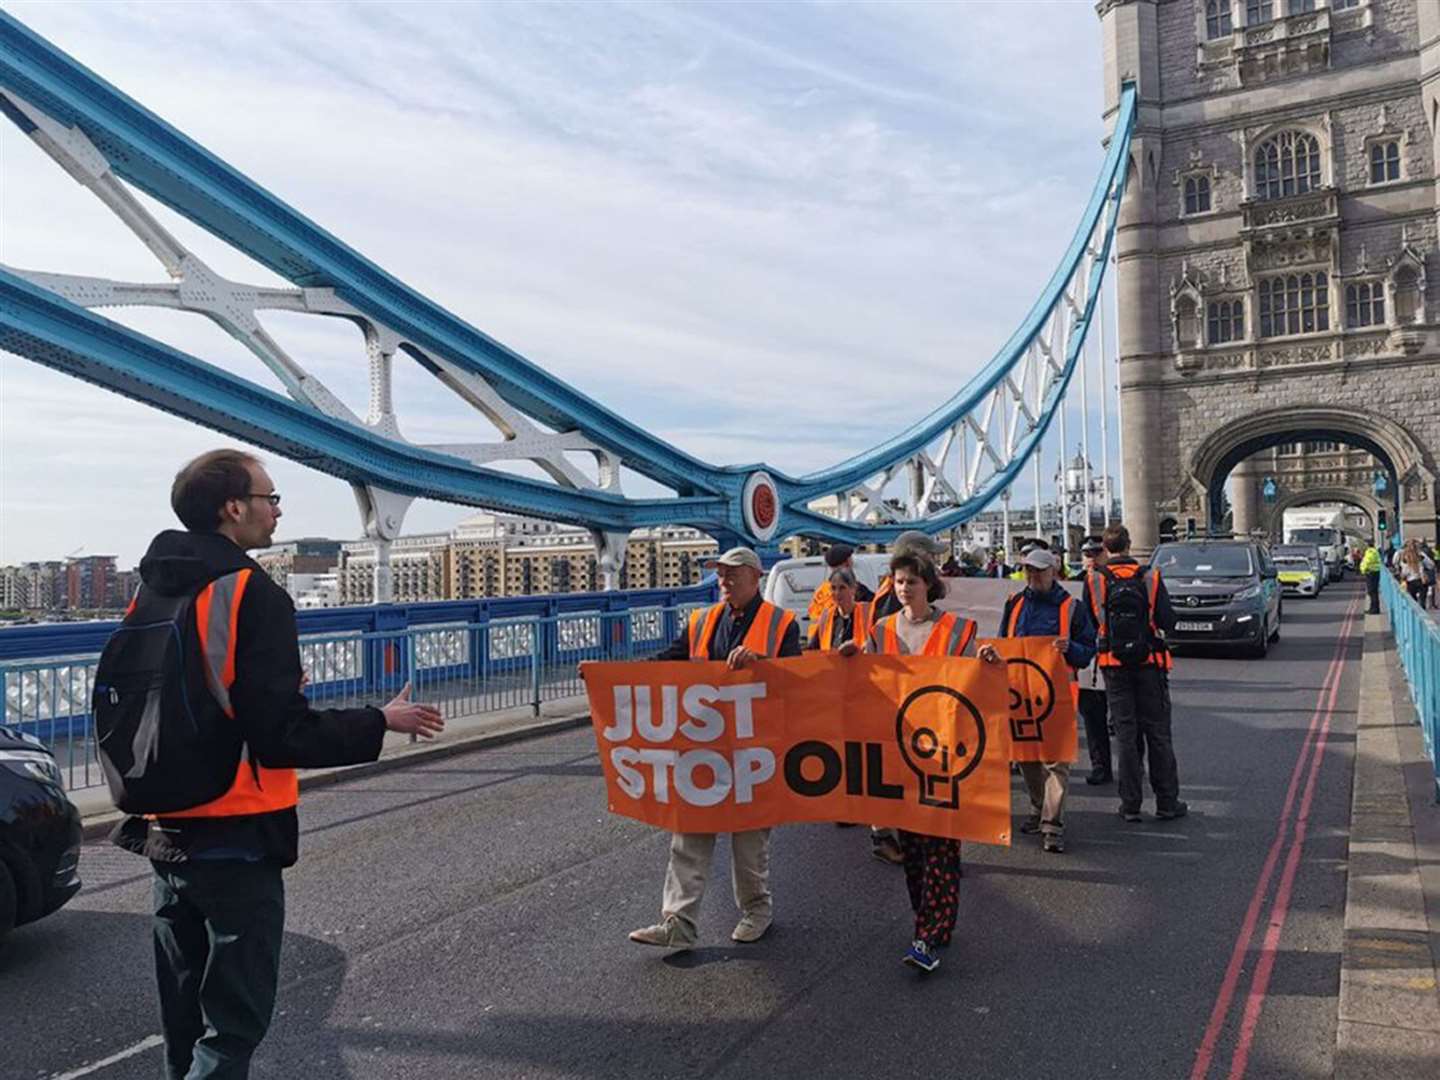 Protesters took to three bridges including Tower Bridge on Tuesday (Just Stop Oil/PA)